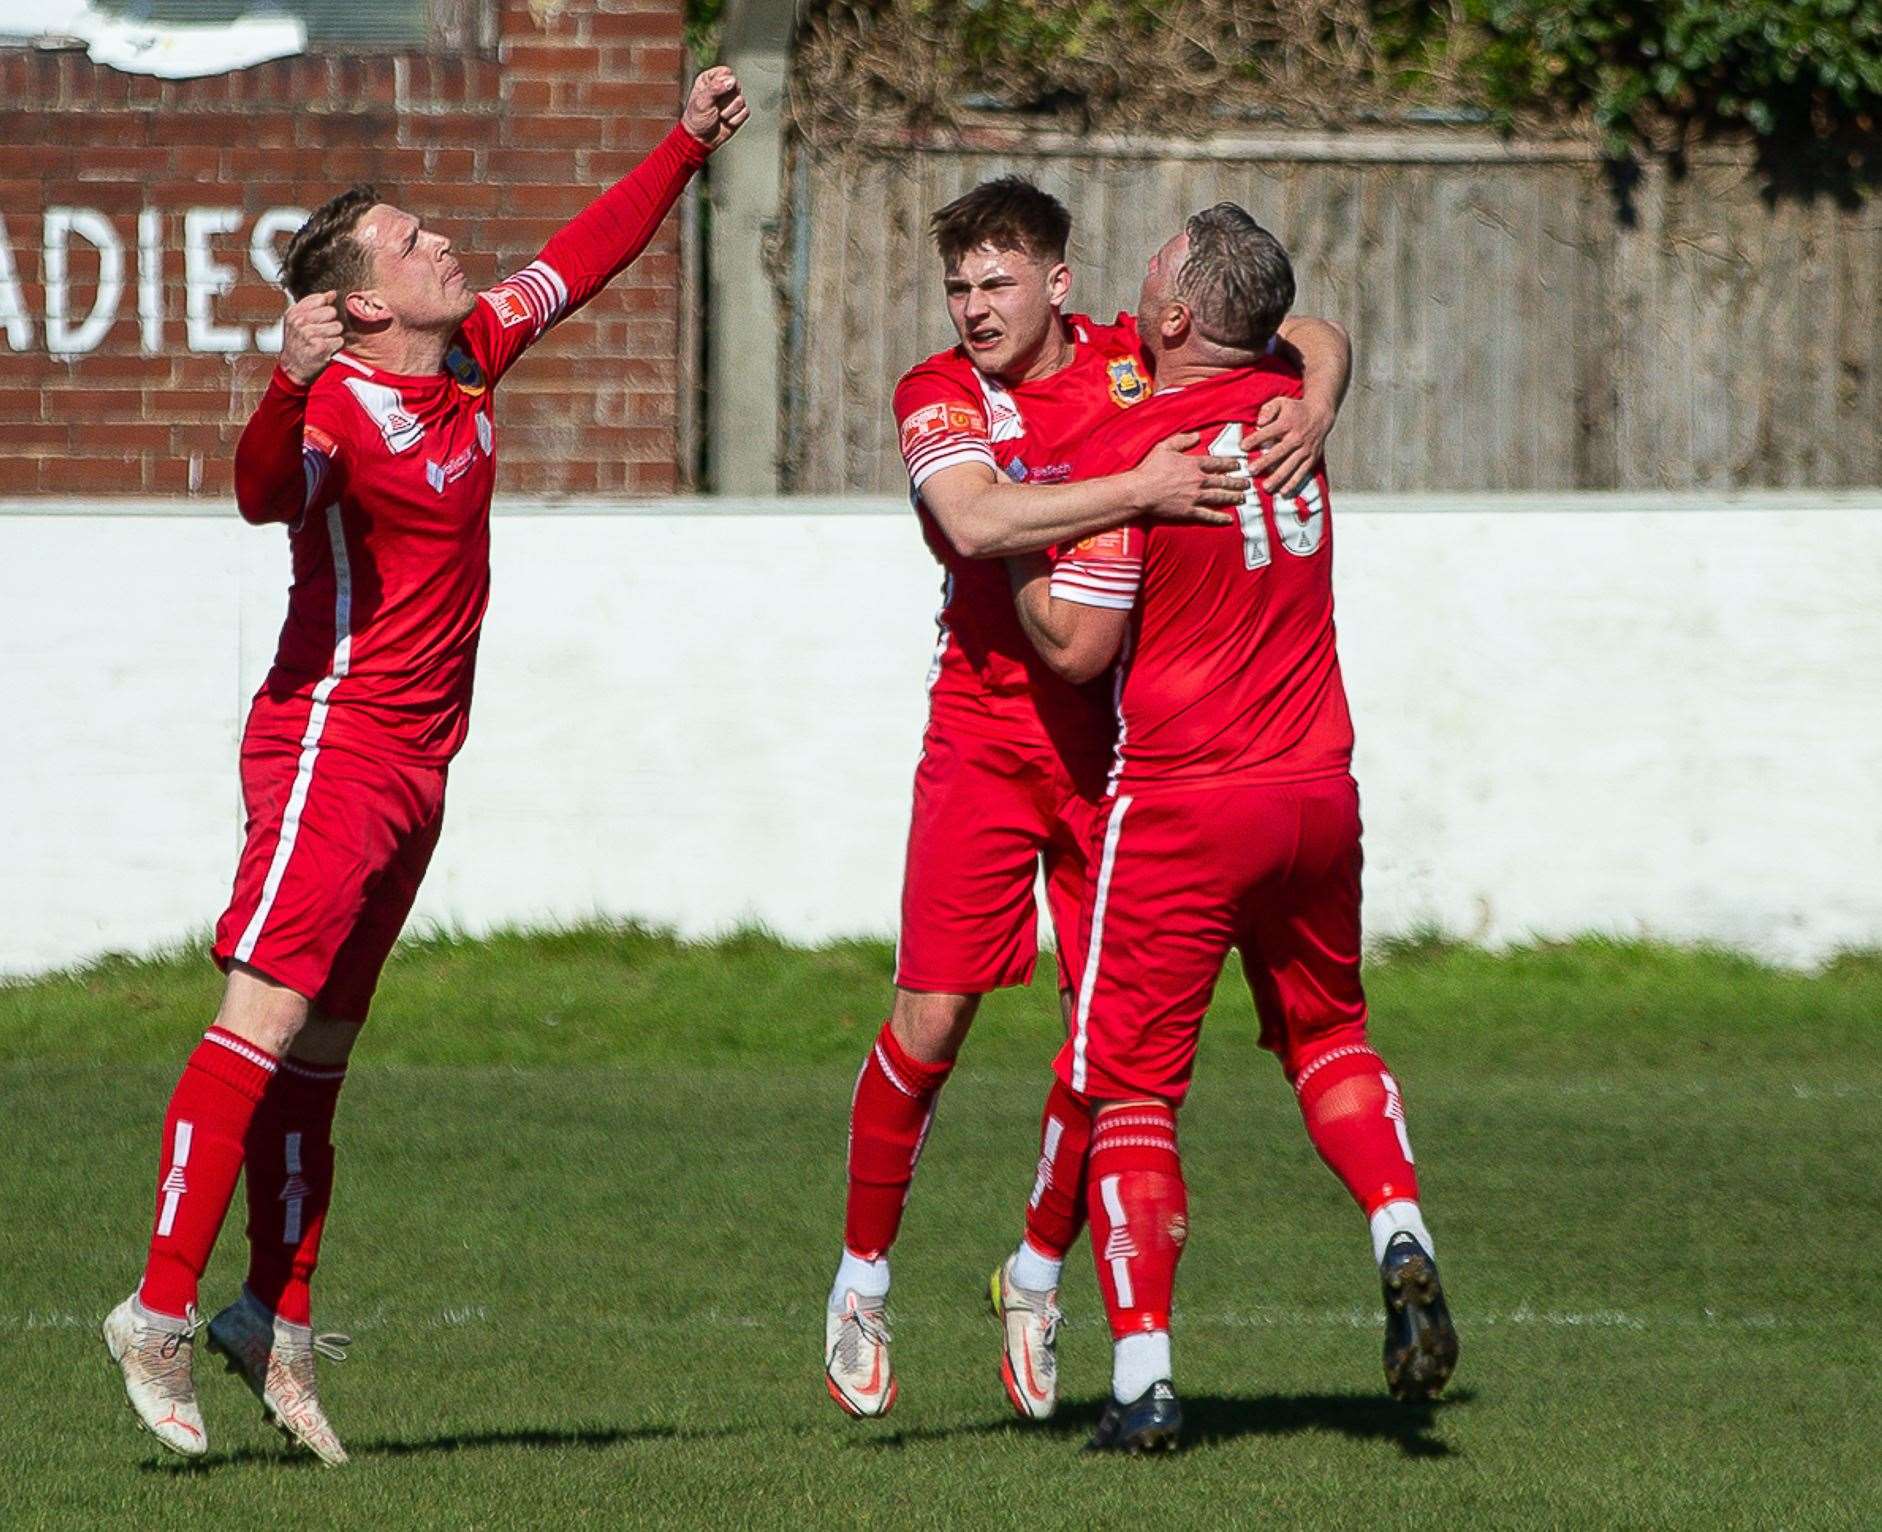 Jack Hanson celebrates after scoring his debut goal against Whitehawk in the weekend win. Picture: Les Biggs